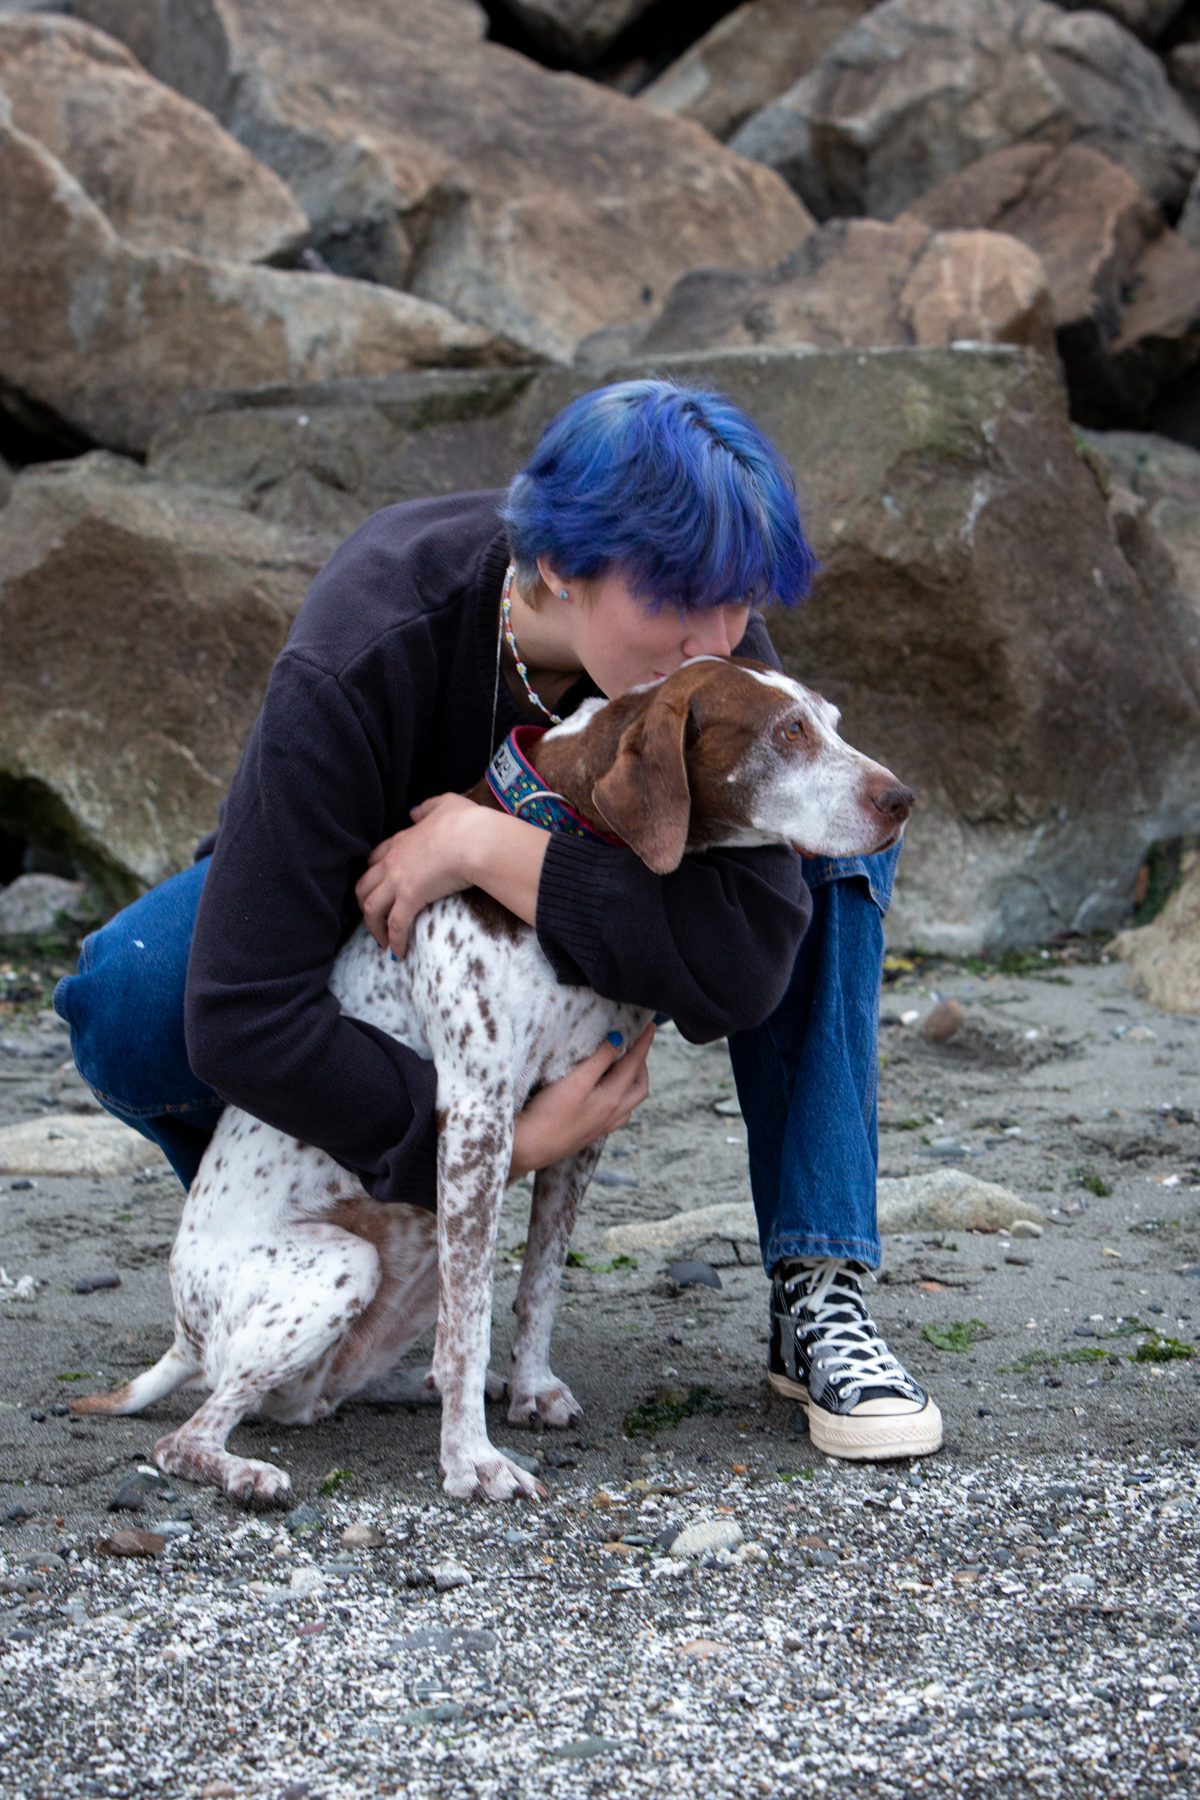 Teen in denims with blue hair hugging GSP dog at beach